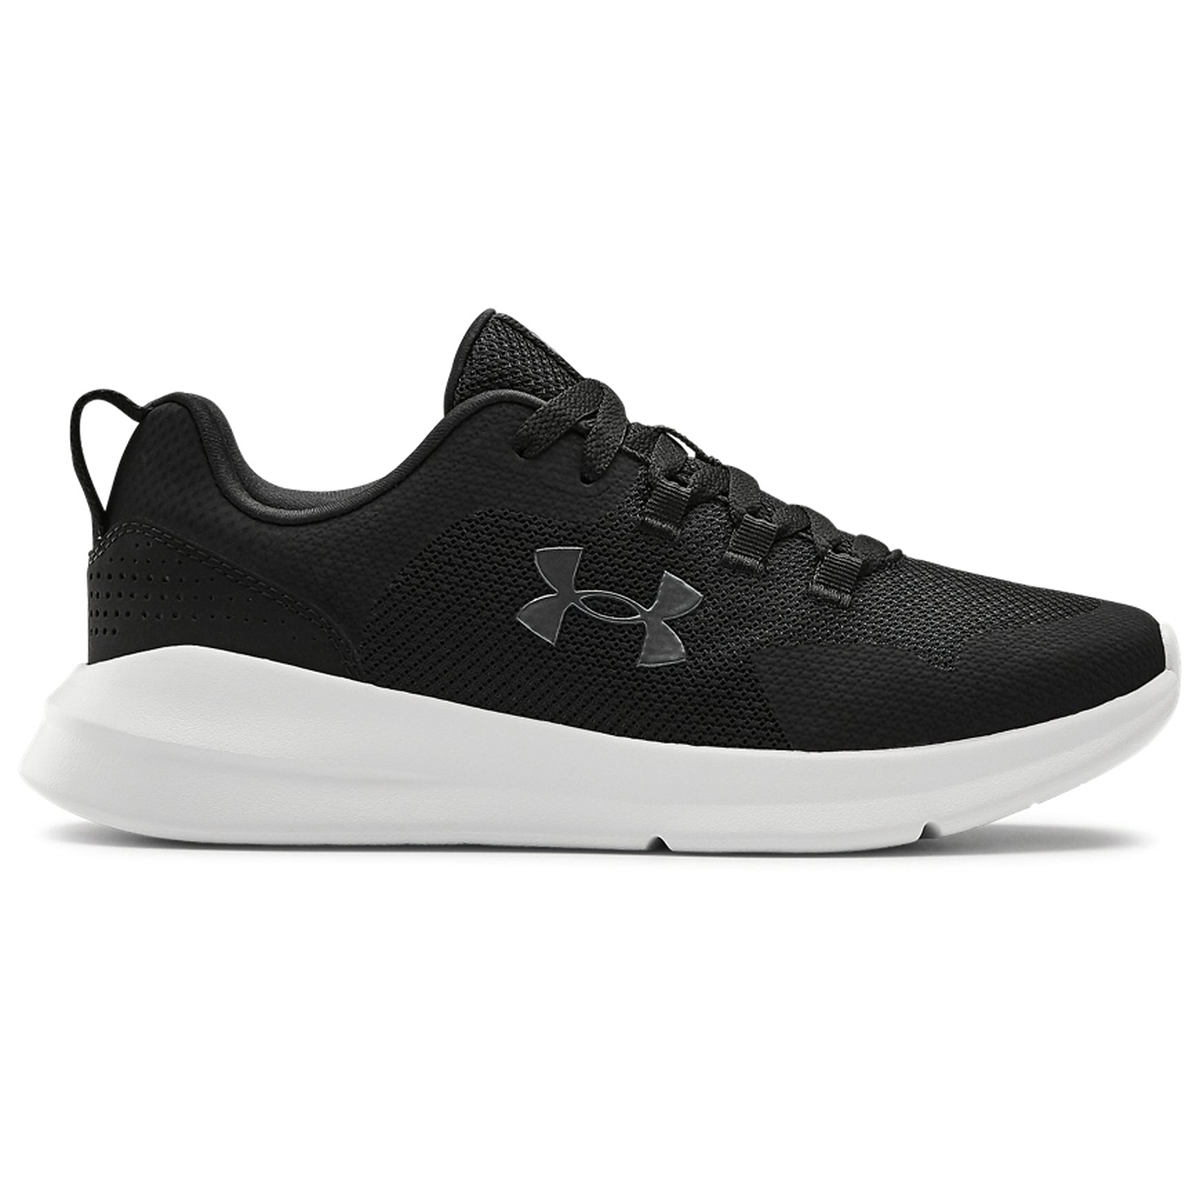 Under Armour Women's Ua Essential Sportstyle Shoes